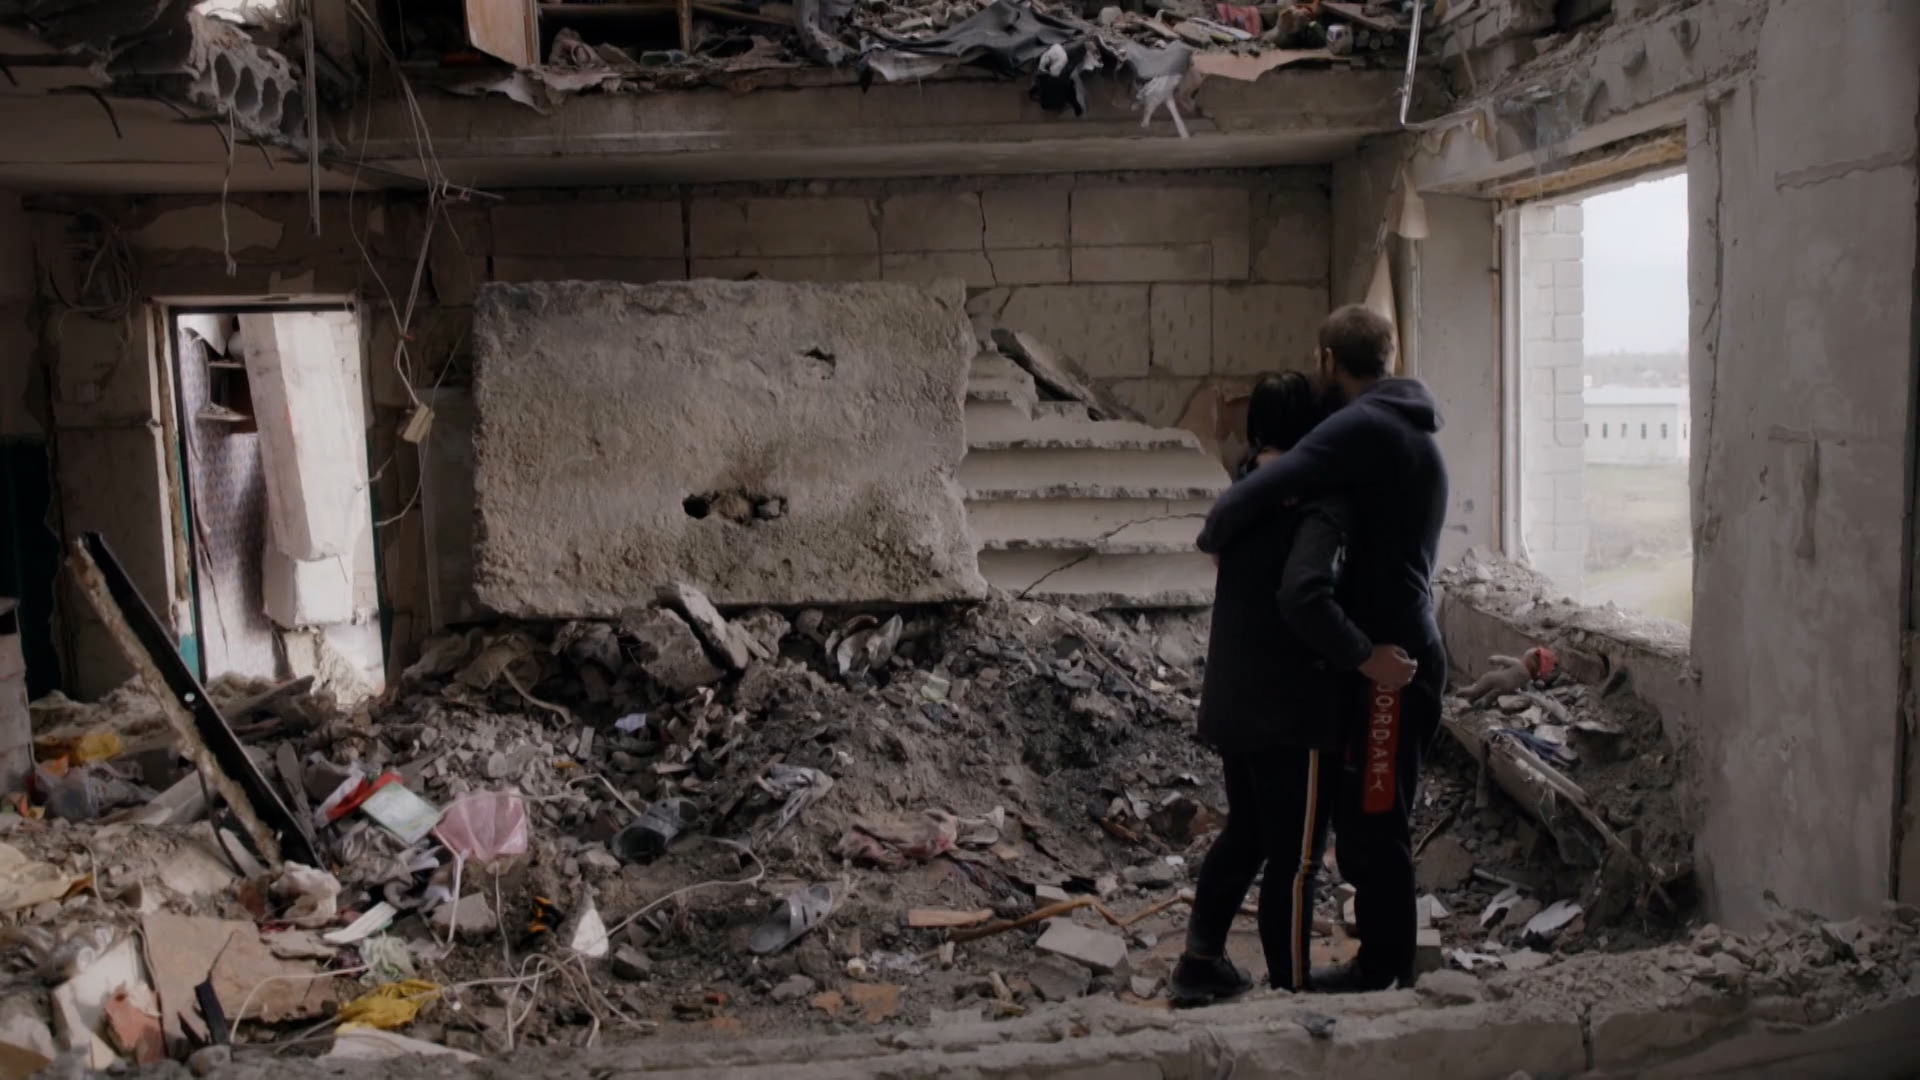 A man and woman comfort each other in the rubble of their home that was leveled in the Ukrainian war.